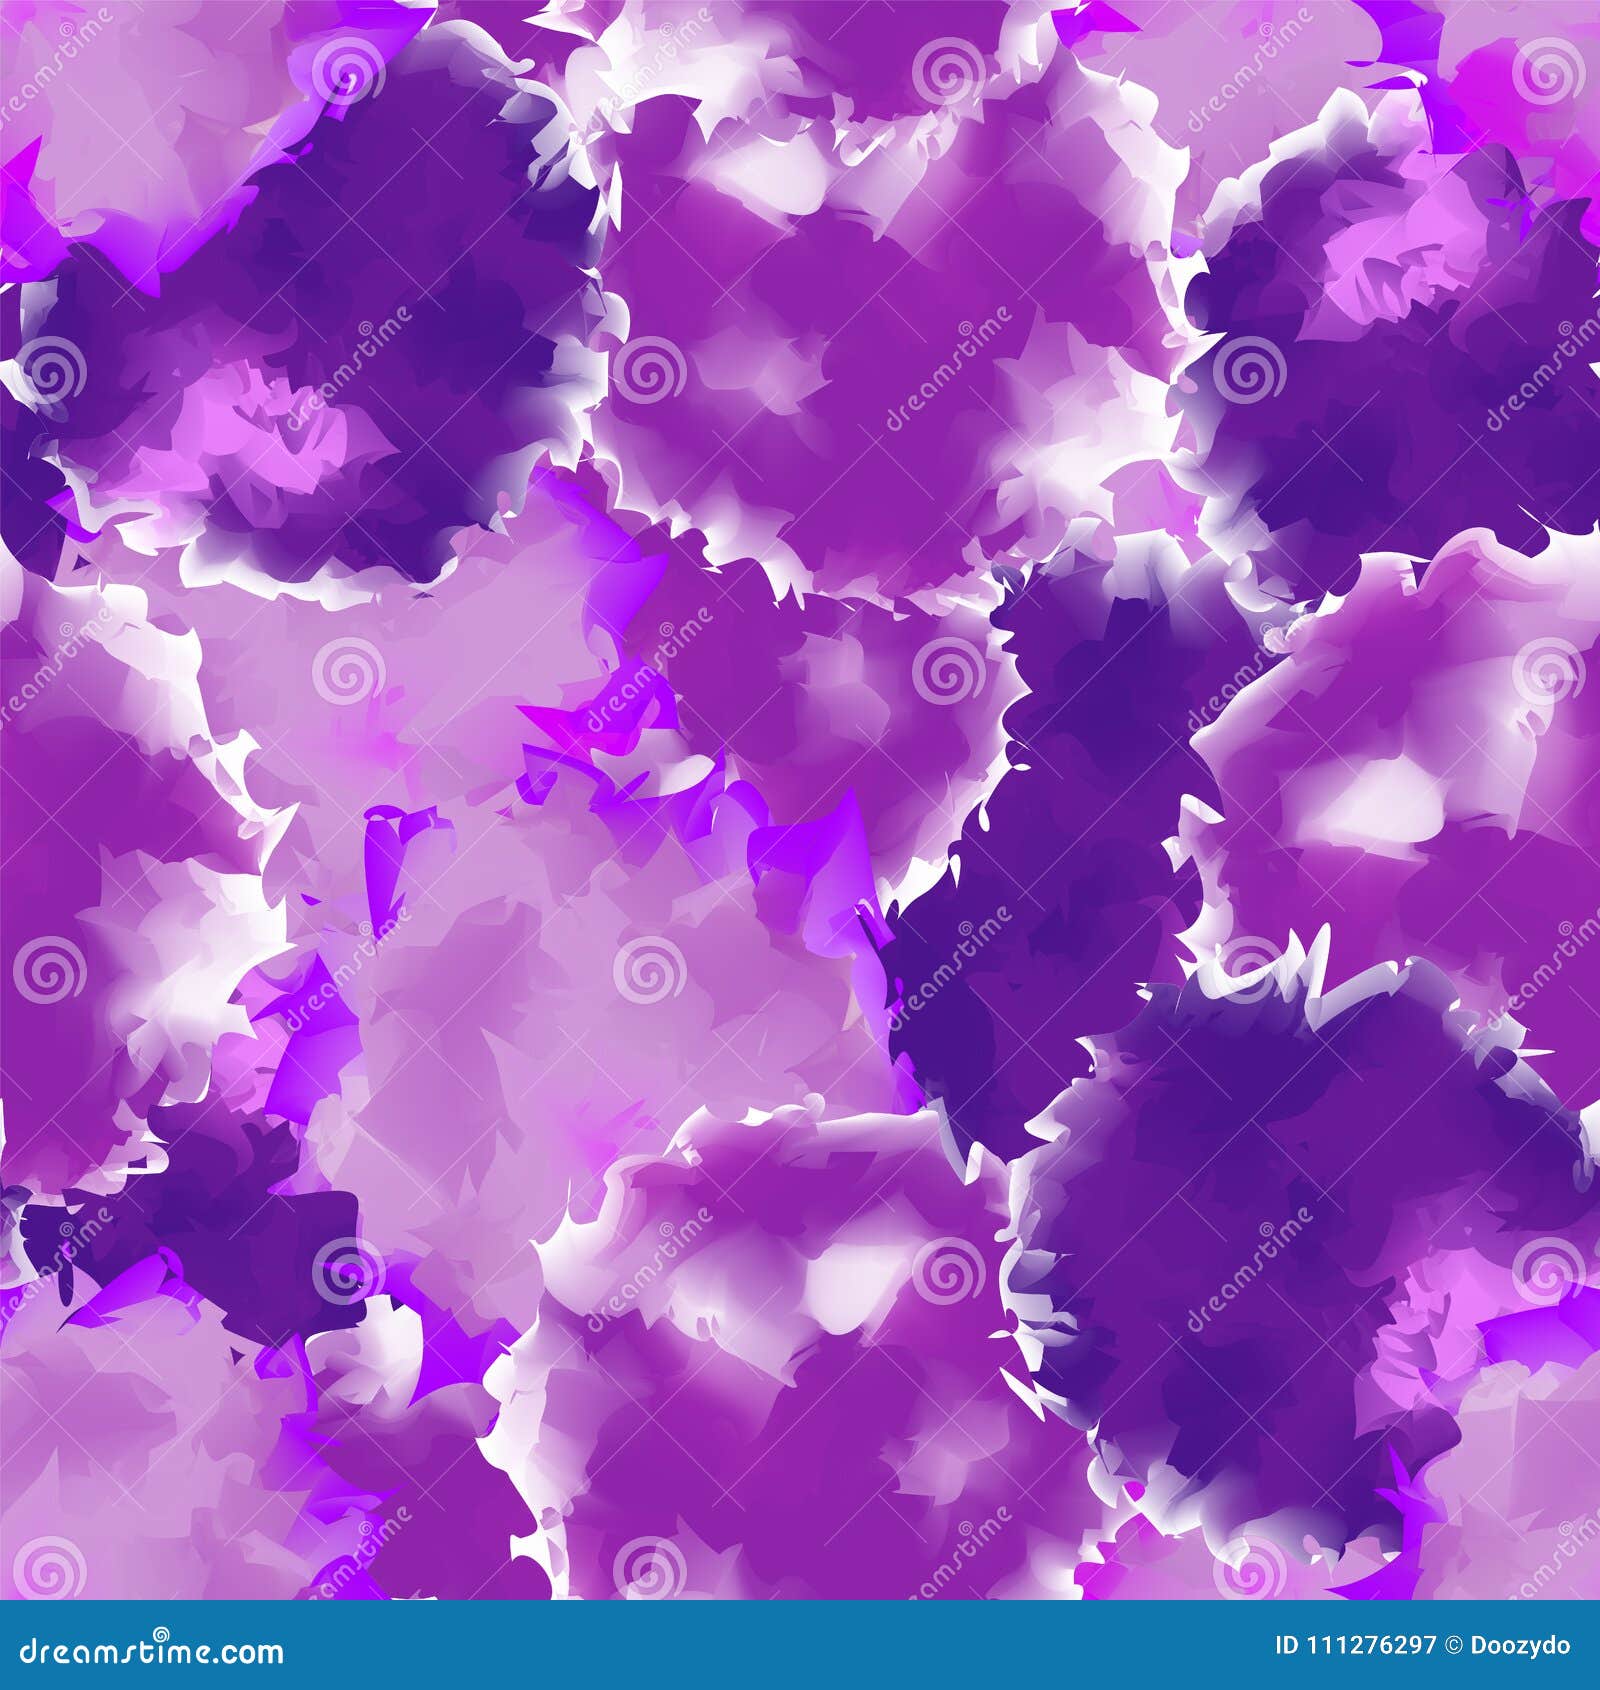 Purple Seamless Watercolor Texture Background. Stock Vector ...